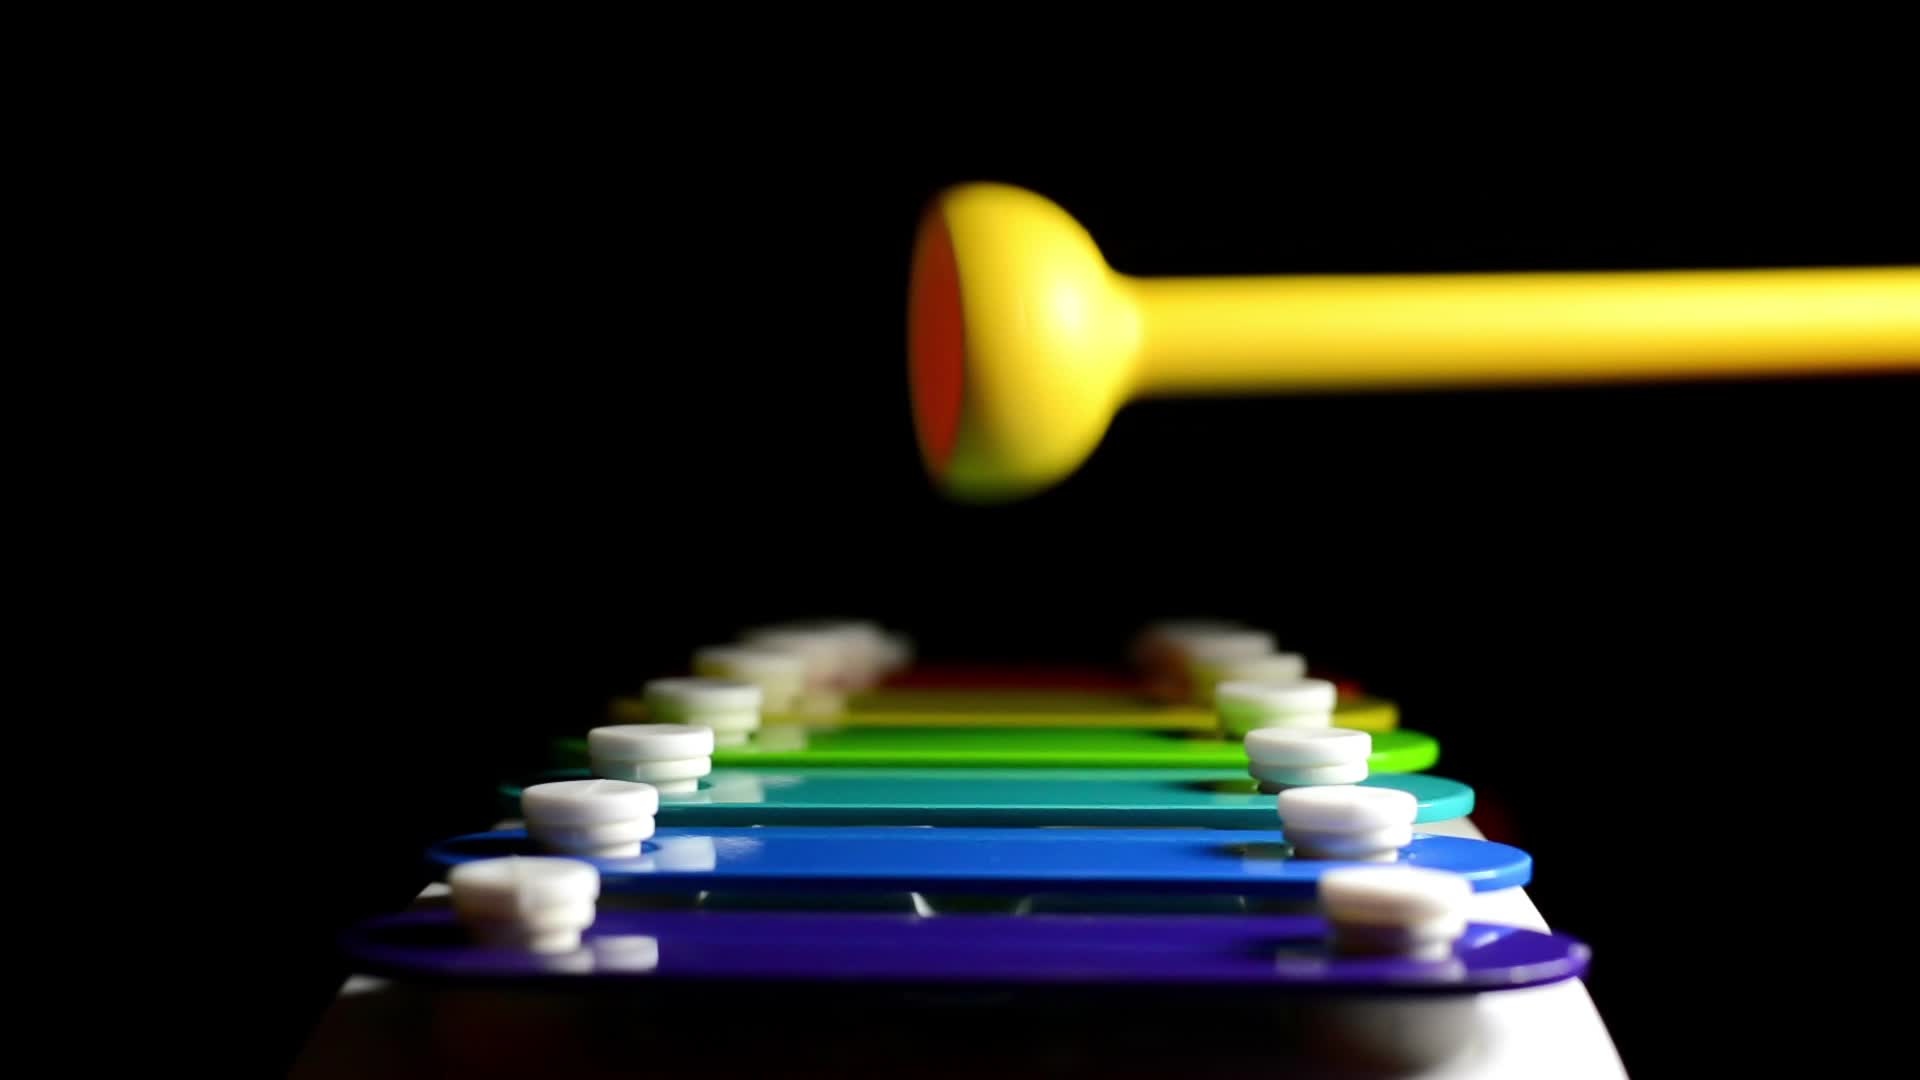 Xylophone: Children's Metallophone, Colorful Jingling Metal Plates, Designed To Develop Sound Perception. 1920x1080 Full HD Wallpaper.